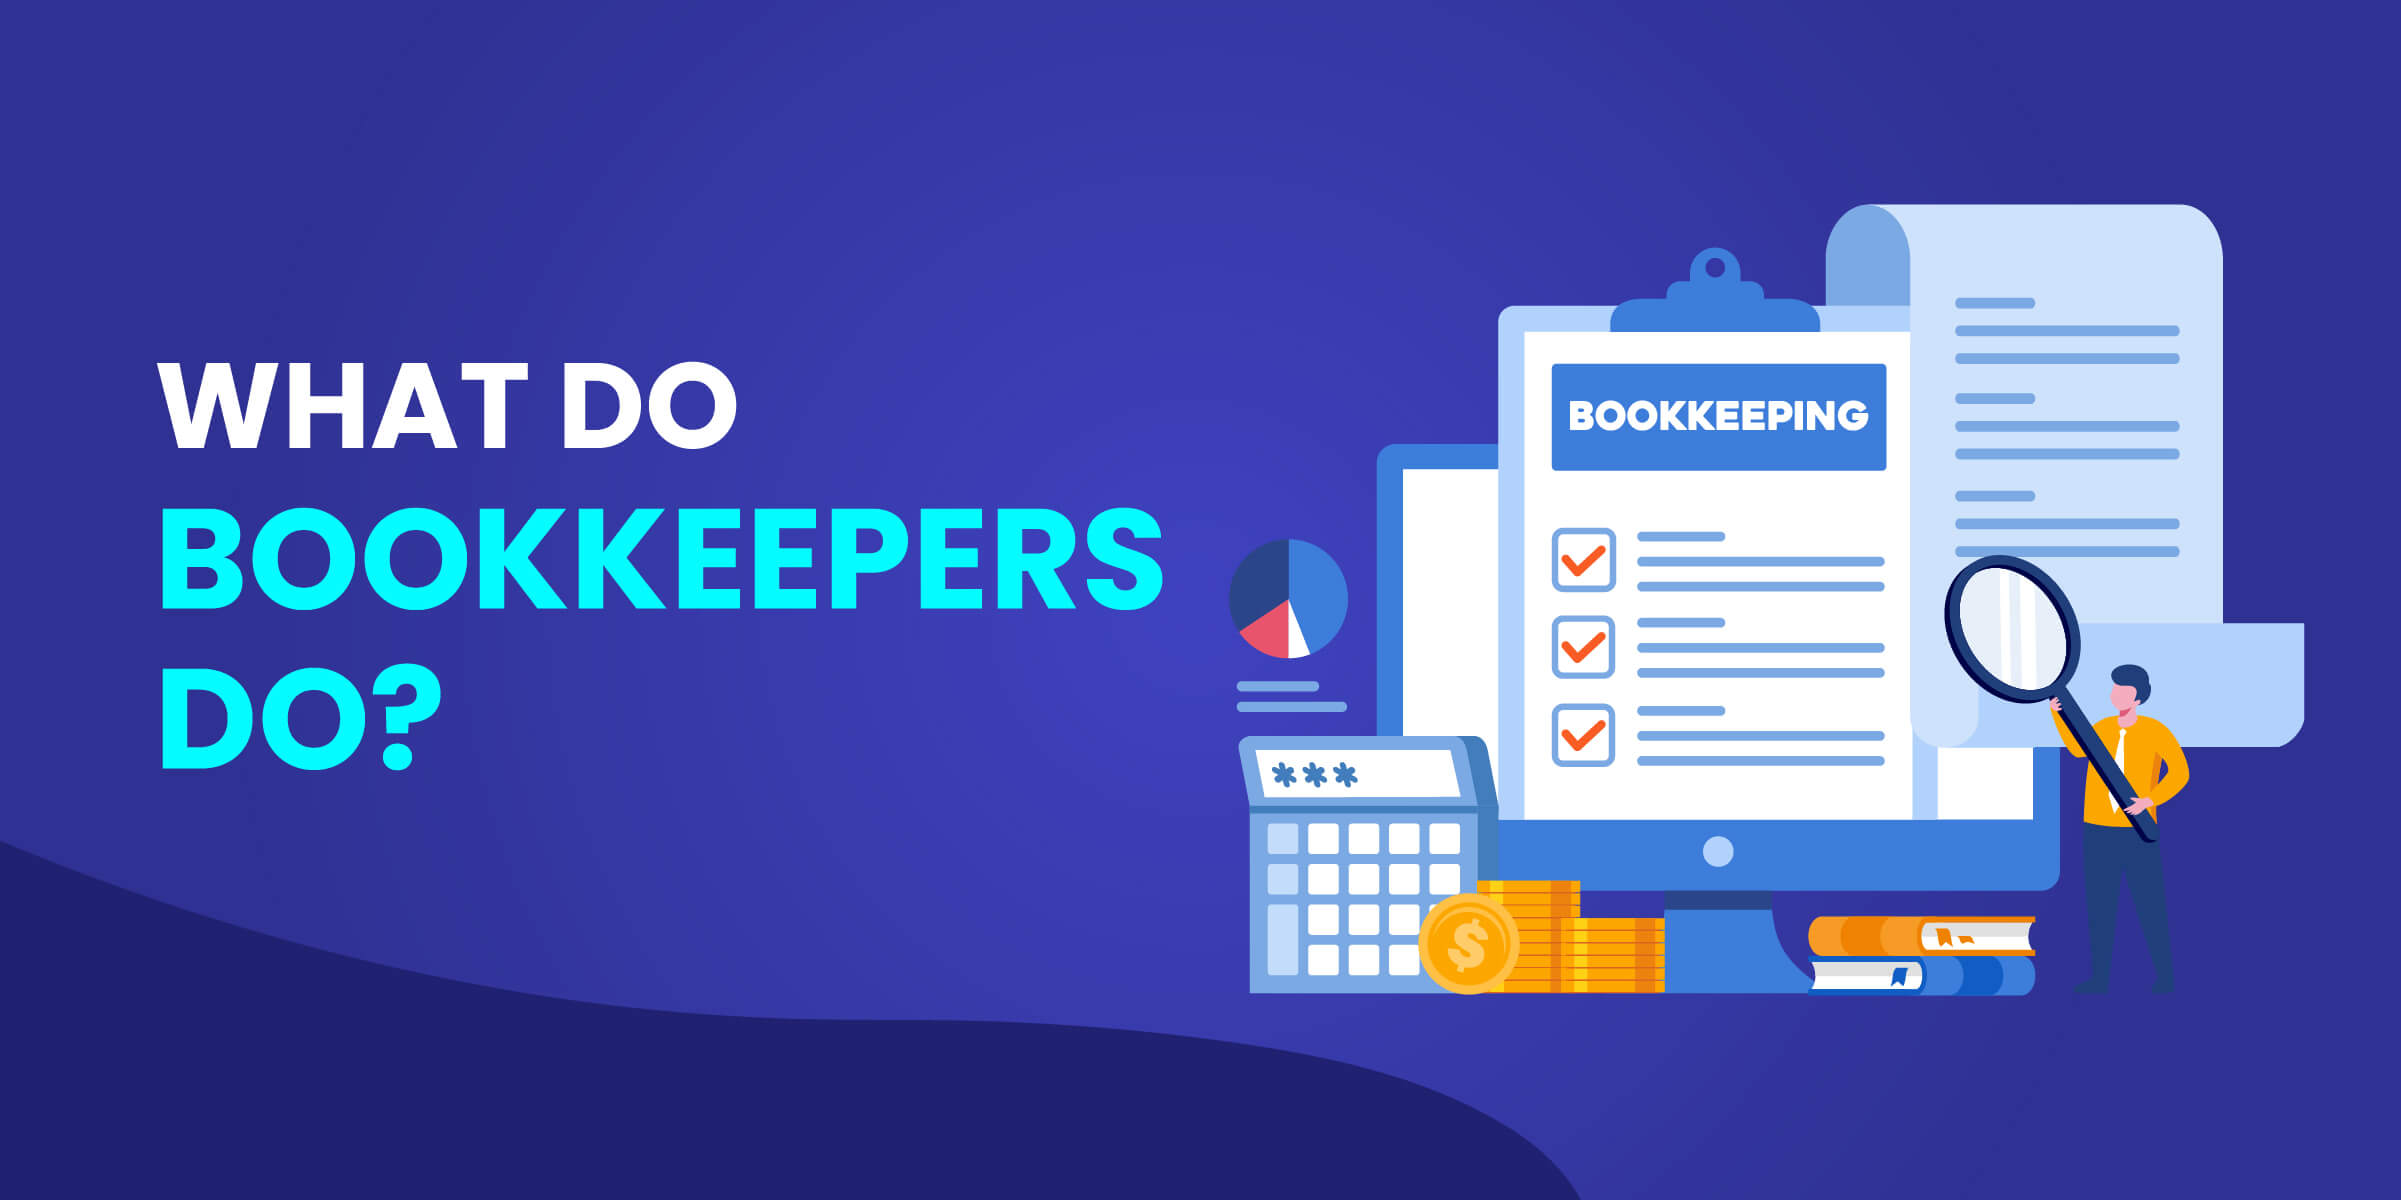 What Do Bookkeepers Do